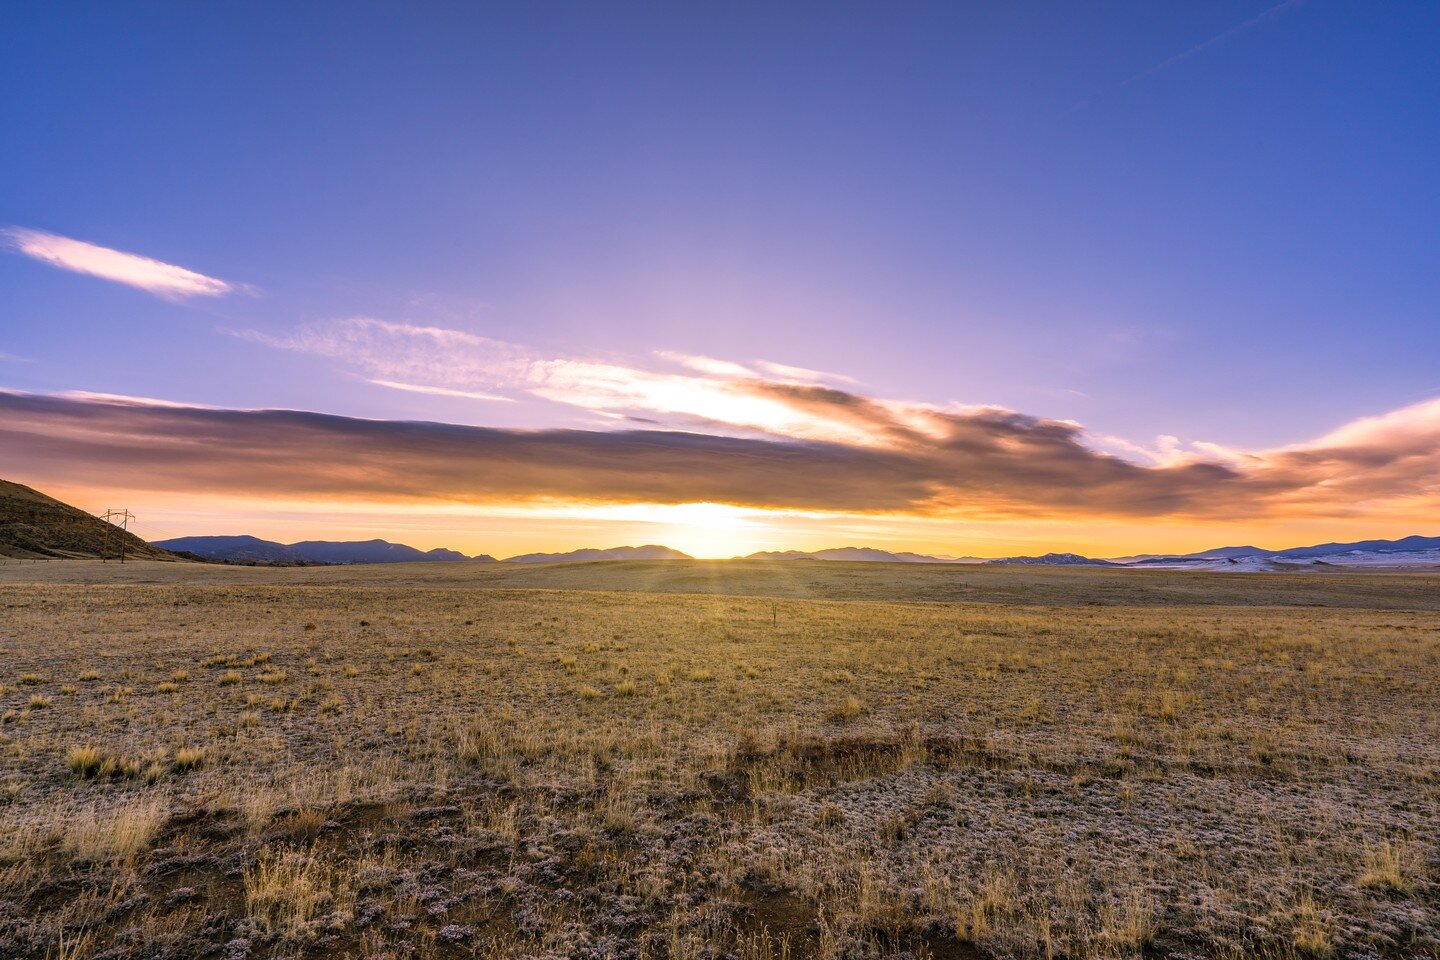 Starting the land selling season off with some glorious sunrise shoots. 

Perfect for grabbing buyer's attention, even if the land is not very interesting.

Have land you need photos of? Give us a call!

#photography #vacantland #landphotography #sun